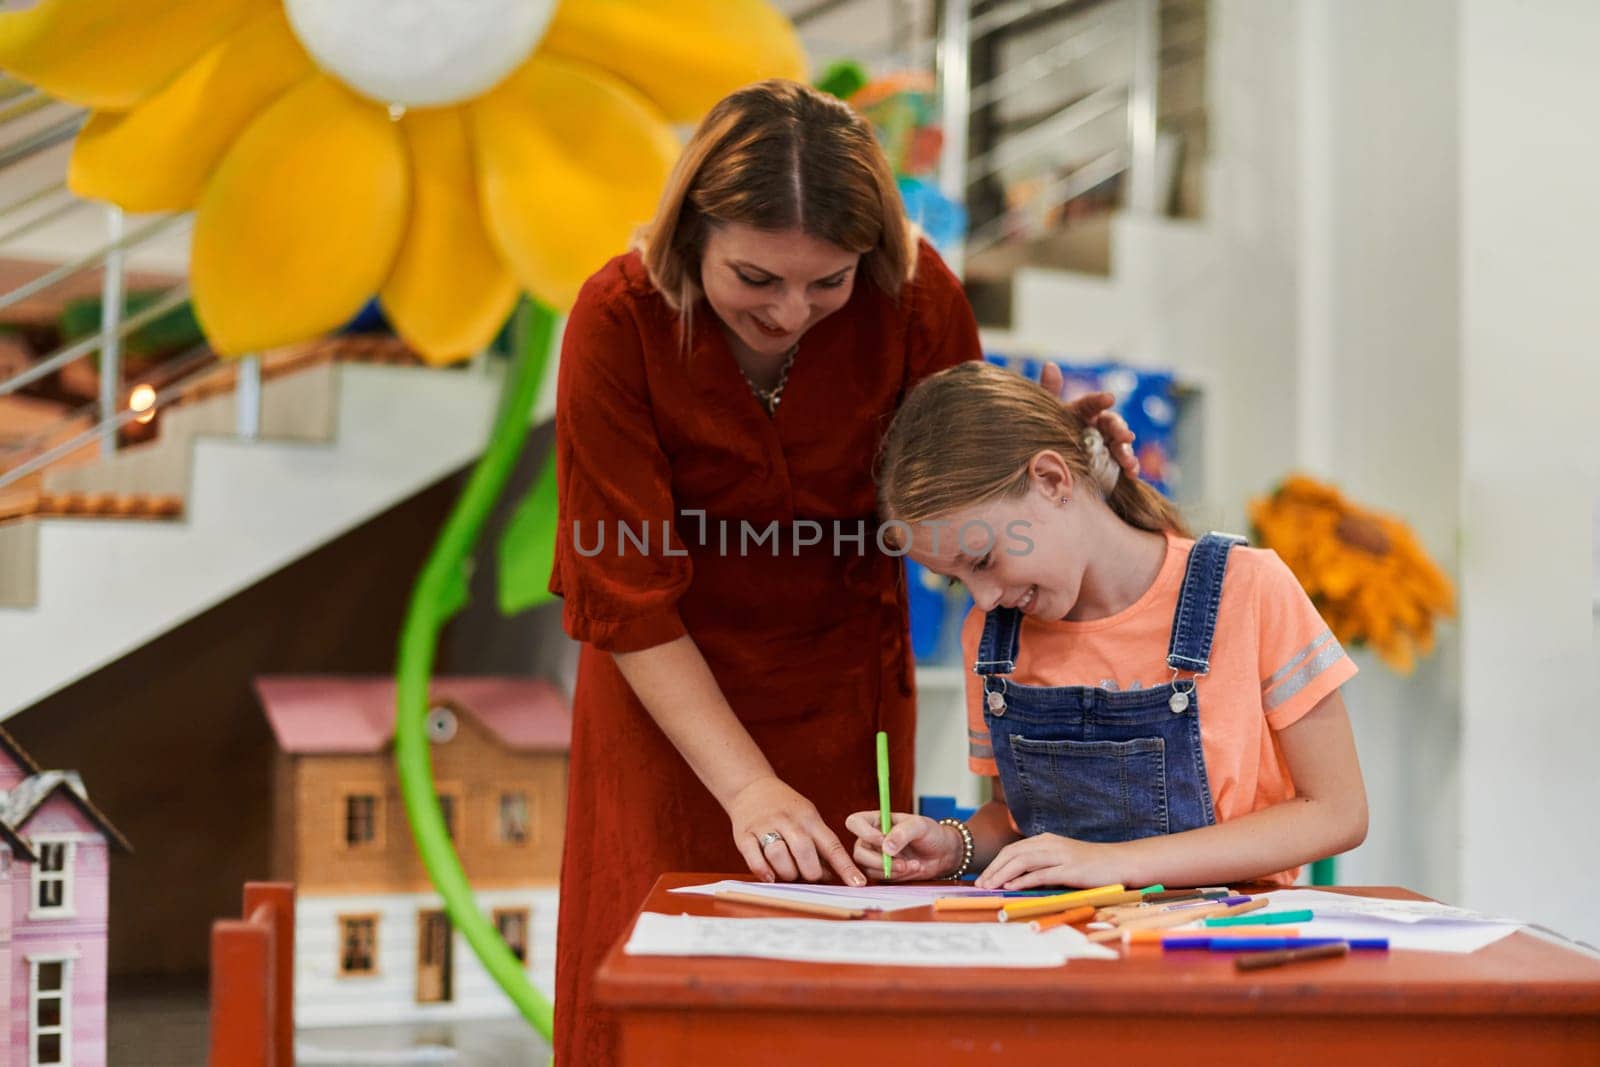 Creative kids during an art class in a daycare center or elementary school classroom drawing with female teacher. High quality photo